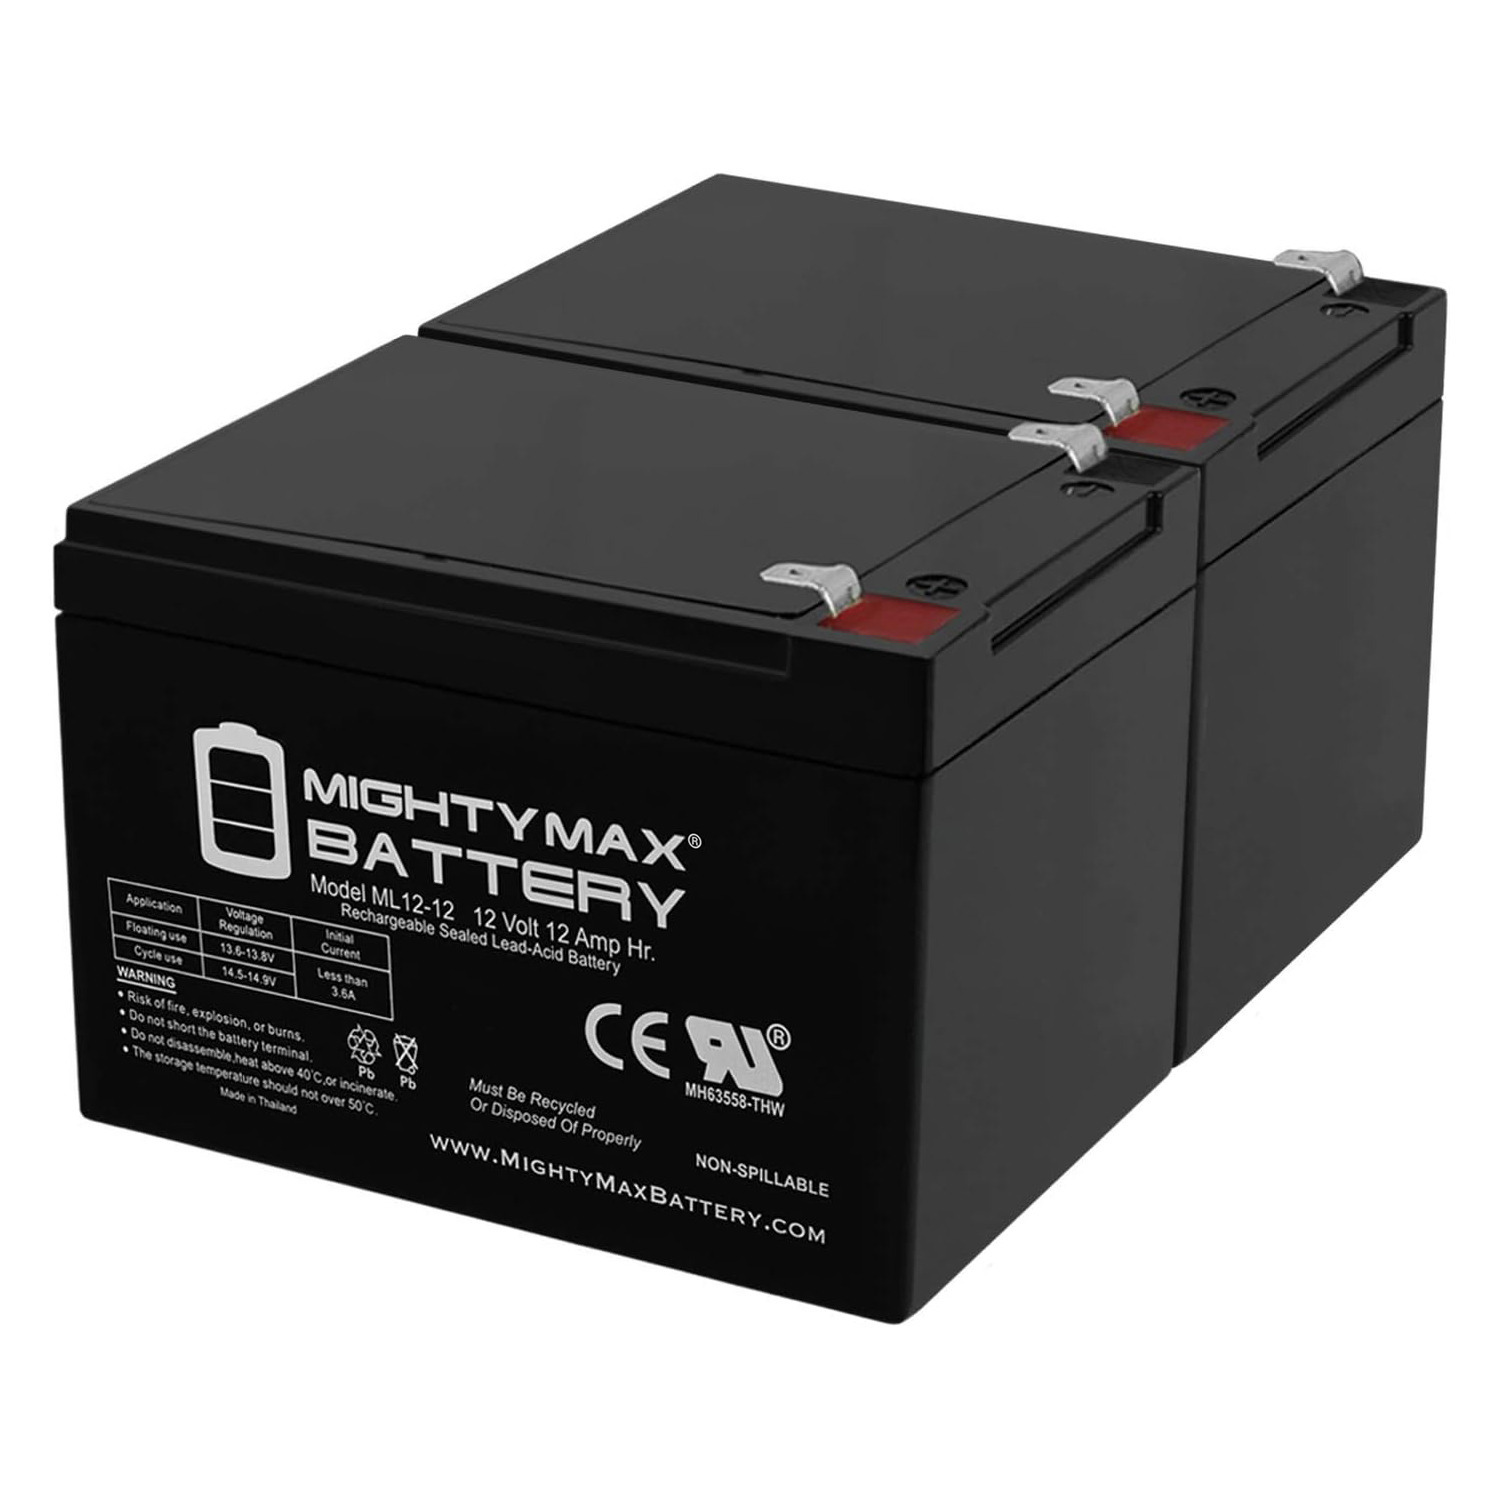 12V 12Ah F2 Lead Acid Replacement Battery compatible with Belkin F6C1000ei-TW-RK - 2 Pack